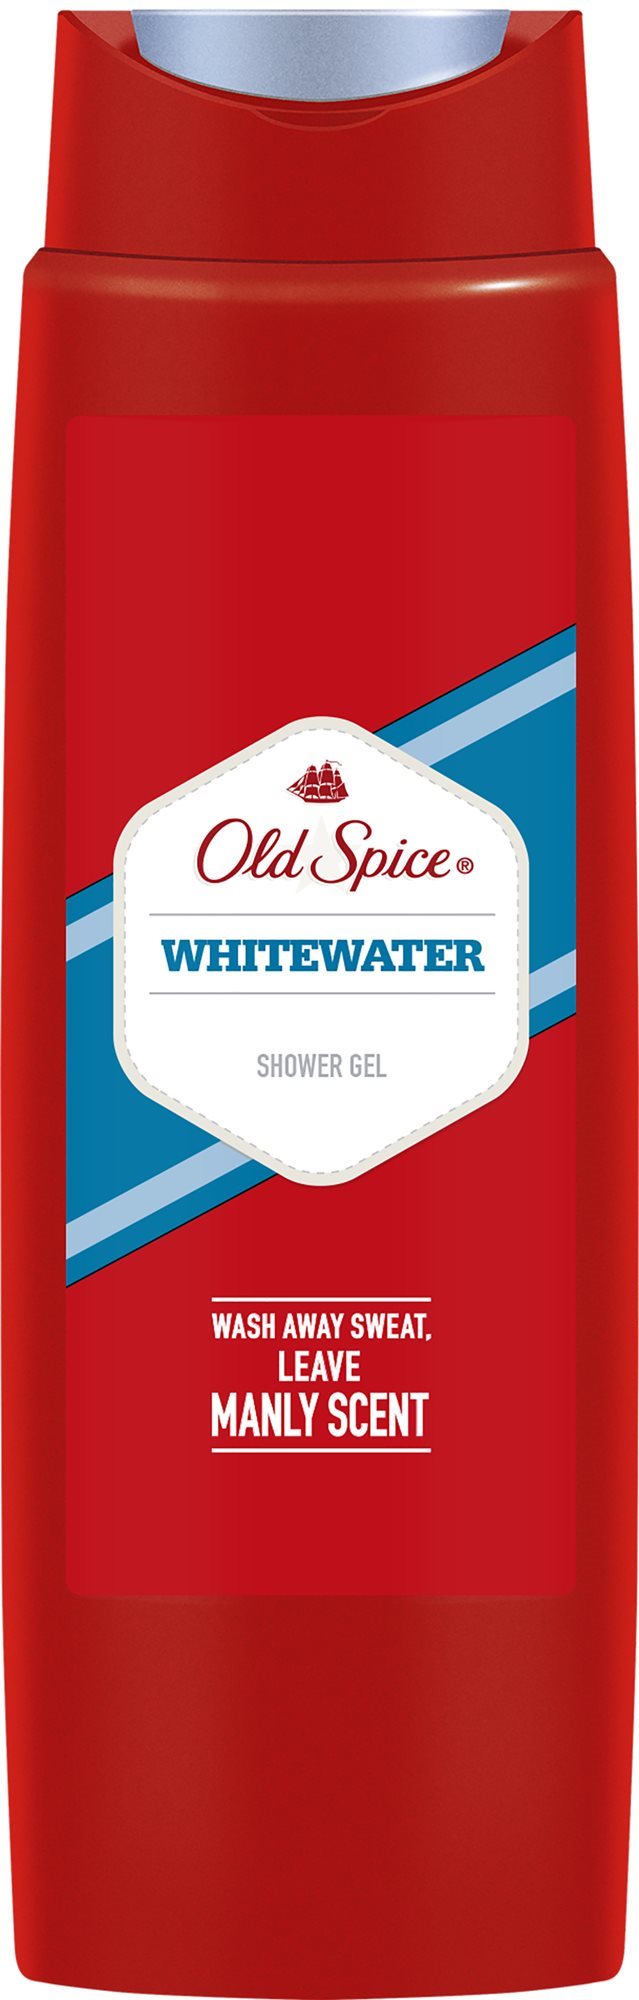 Tusfürdő OLD SPICE WhiteWater 250 ml